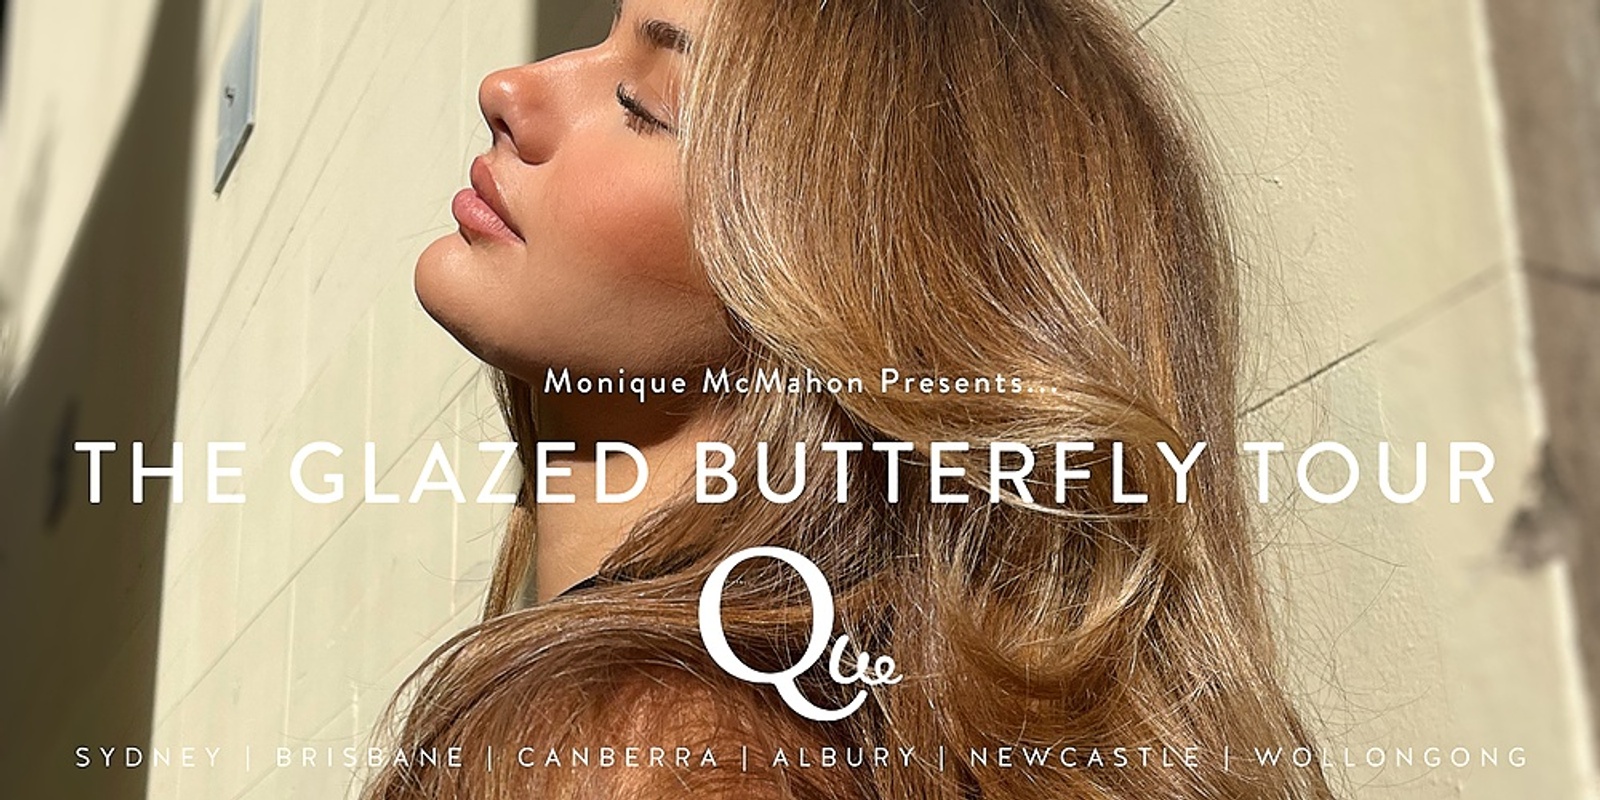 Banner image for BRISBANE - Double Glazed Butterfly Tour, presented by Monique McMahon 